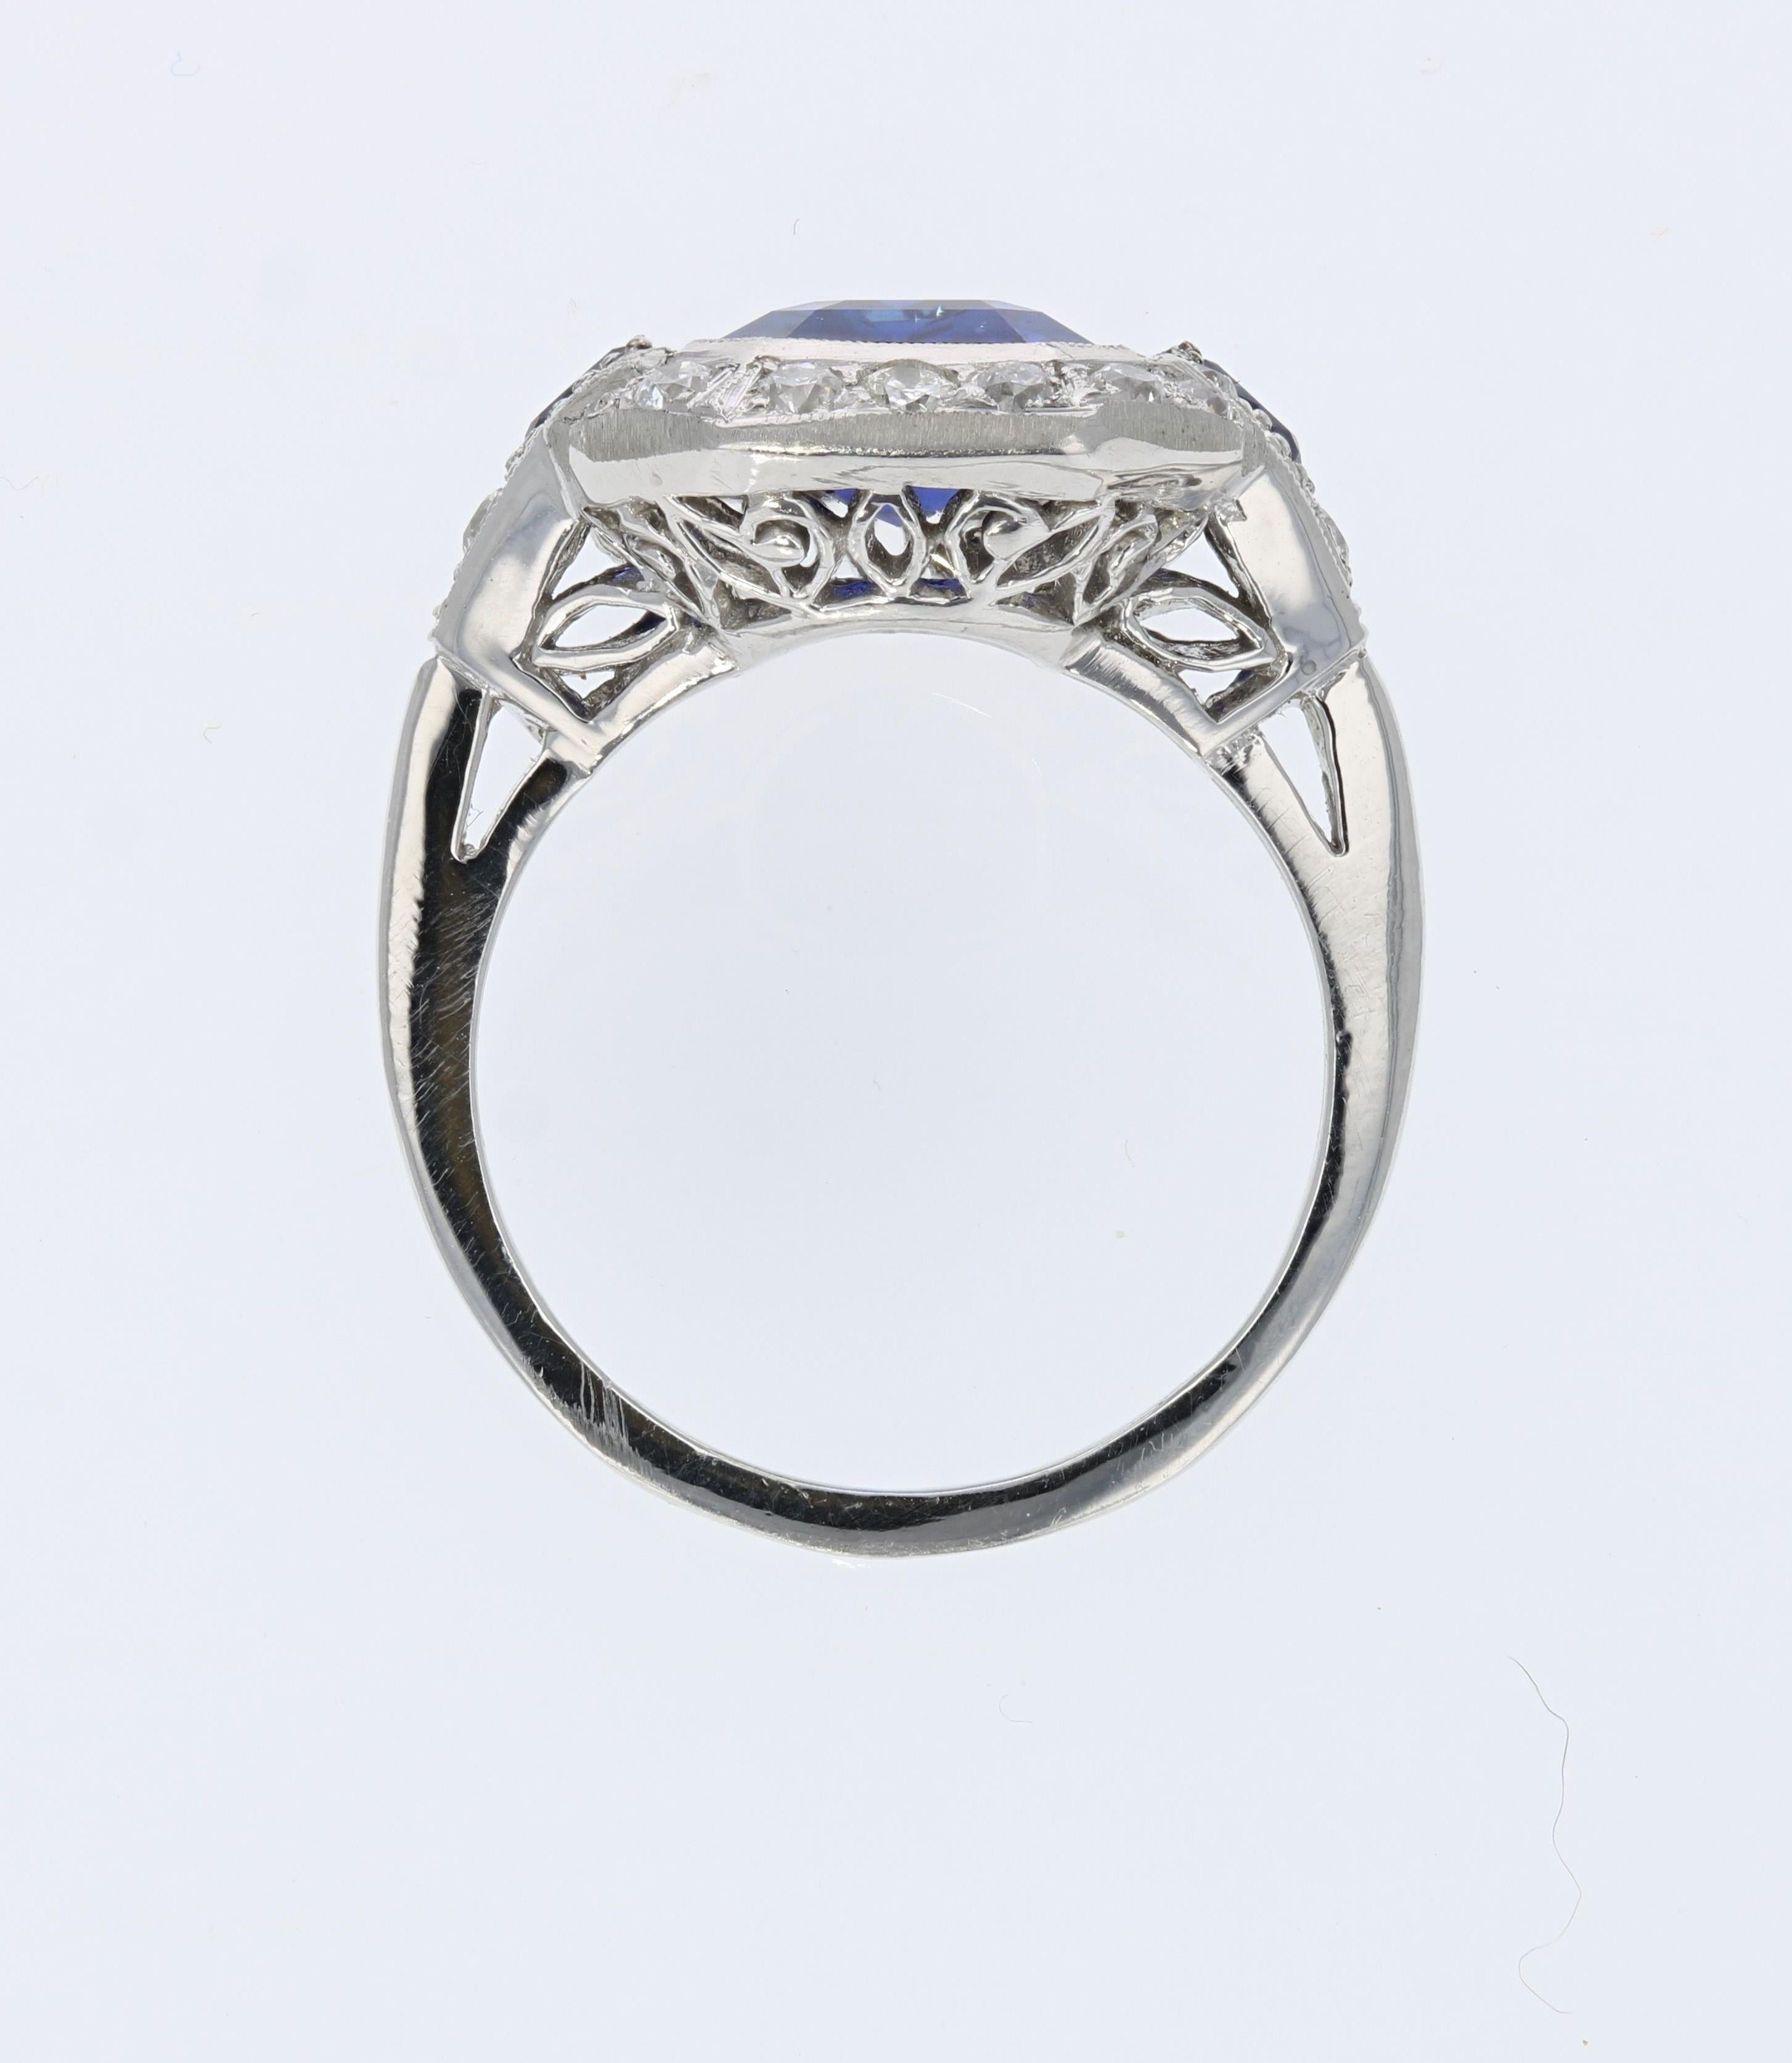 This Art Deco style platinum estate ring is centered by an emerald-cut blue sapphire that weighs approximately 3.55 carats. The sapphire is accented by 2 pear-shaped blue sapphires weighing approximately 0.10 total carats, and 20 old mine-cut